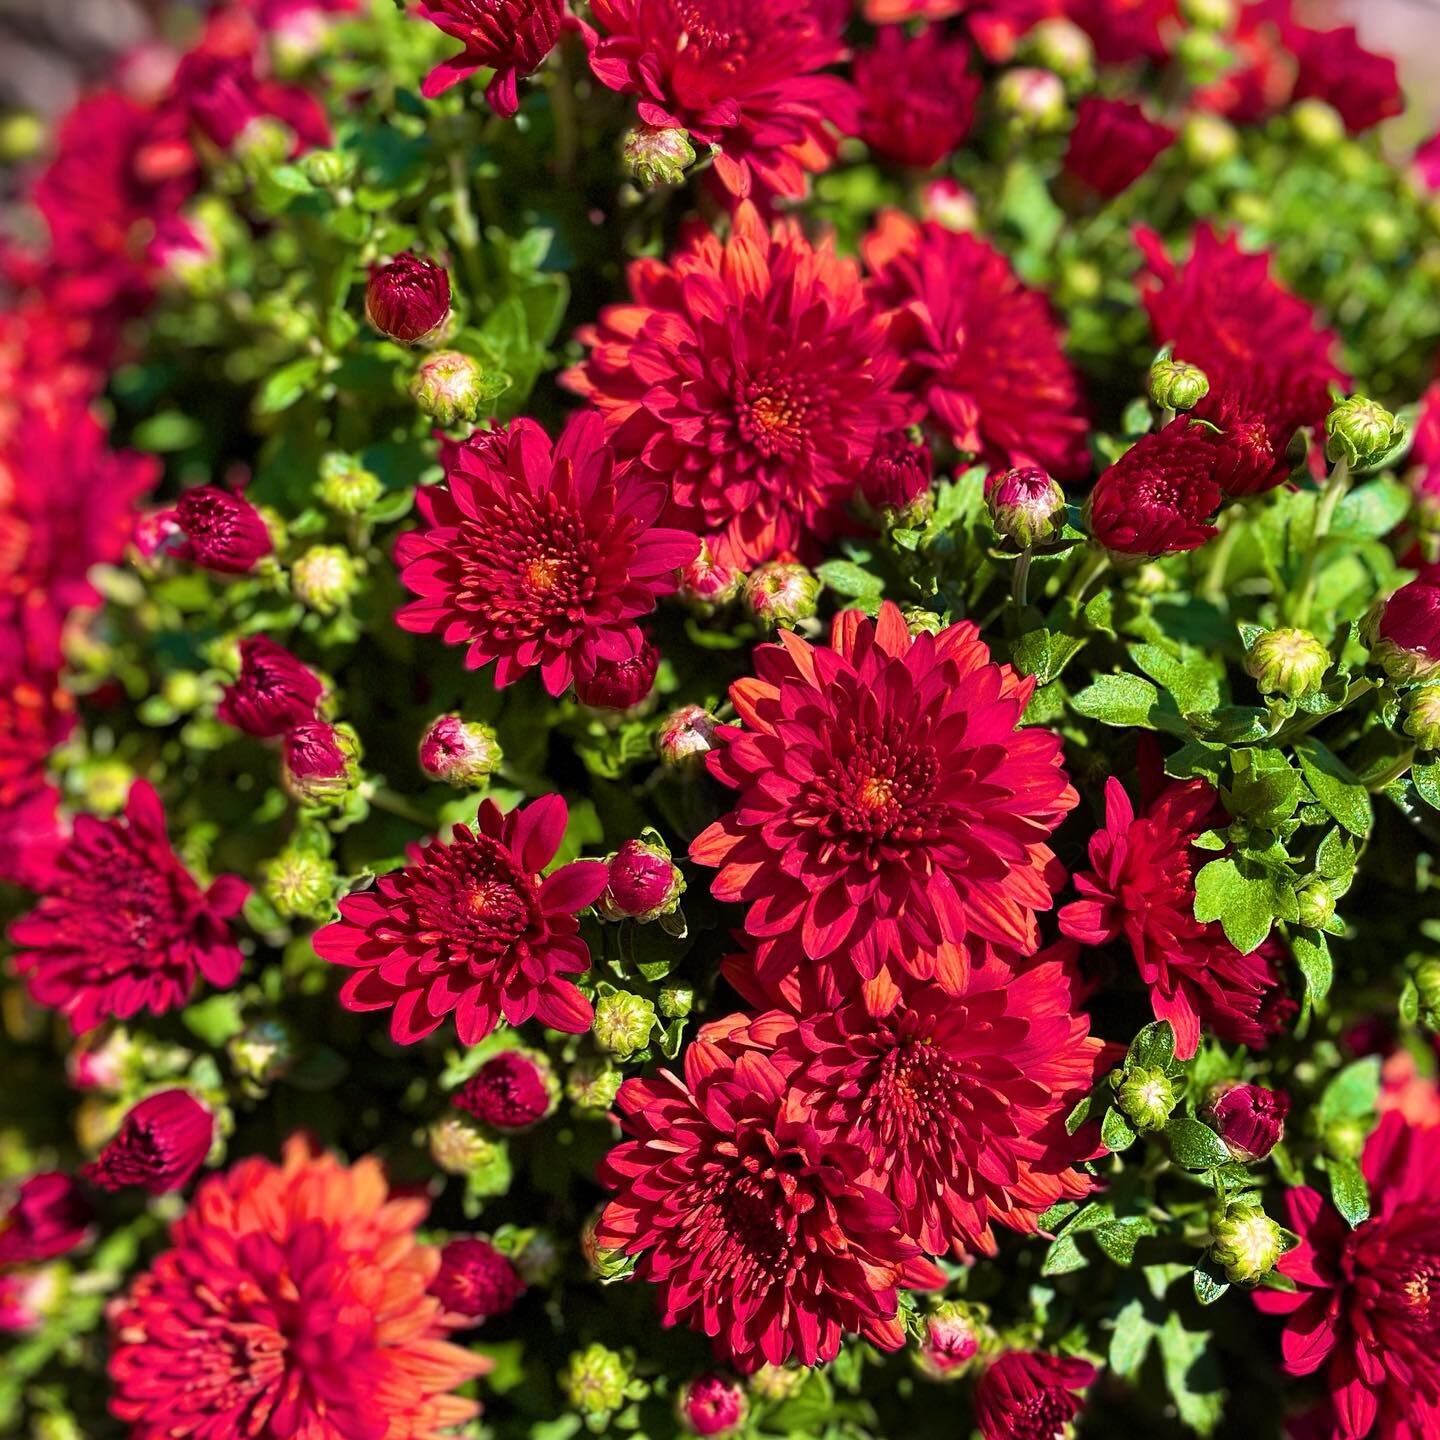 Just love this rusty red in the annual garden mums 😍